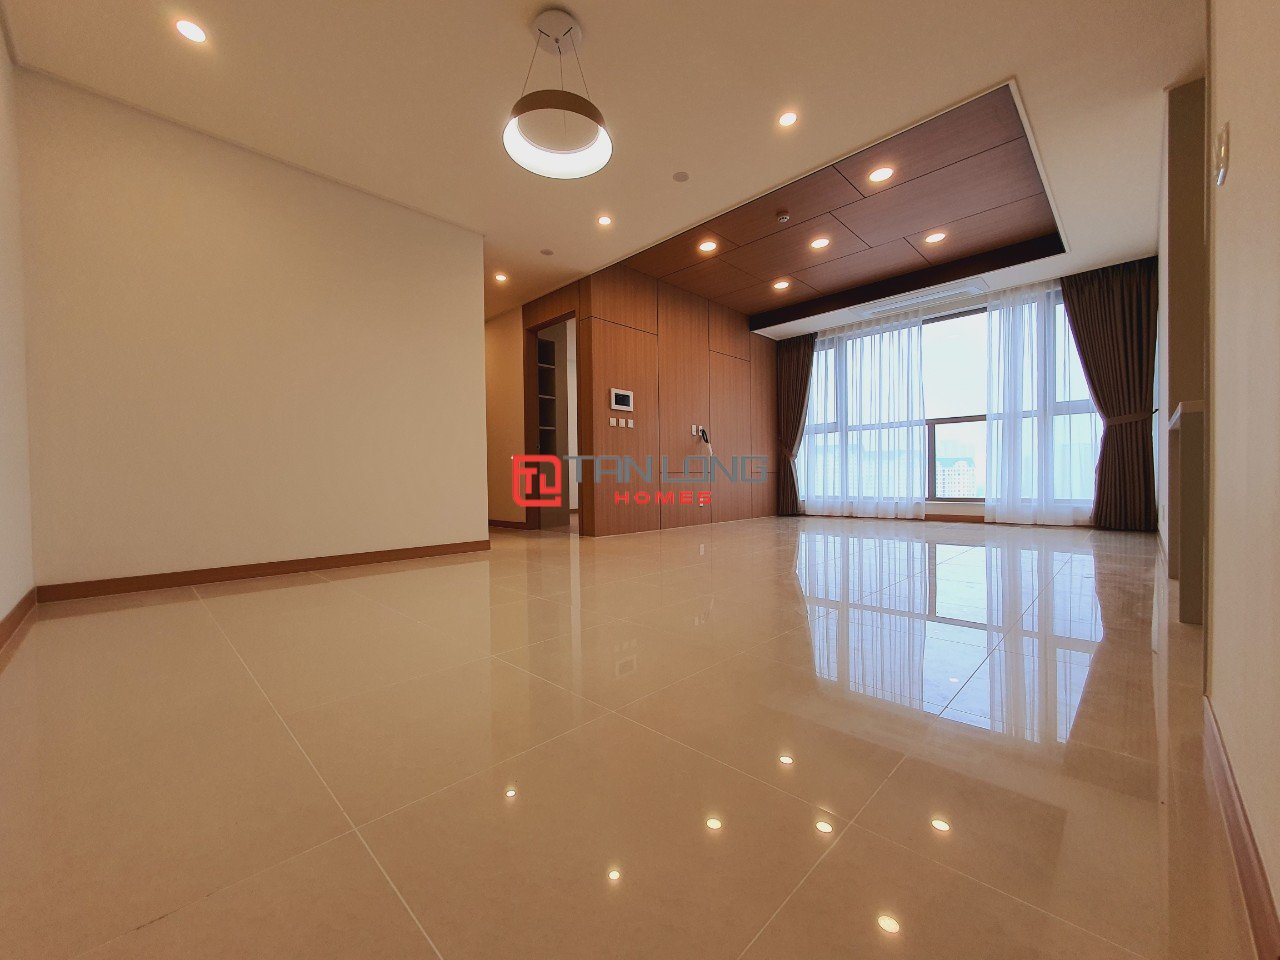 A 2-bedrooms apartment for rent in Starlake, located in 901 building - Internal: 101sqm